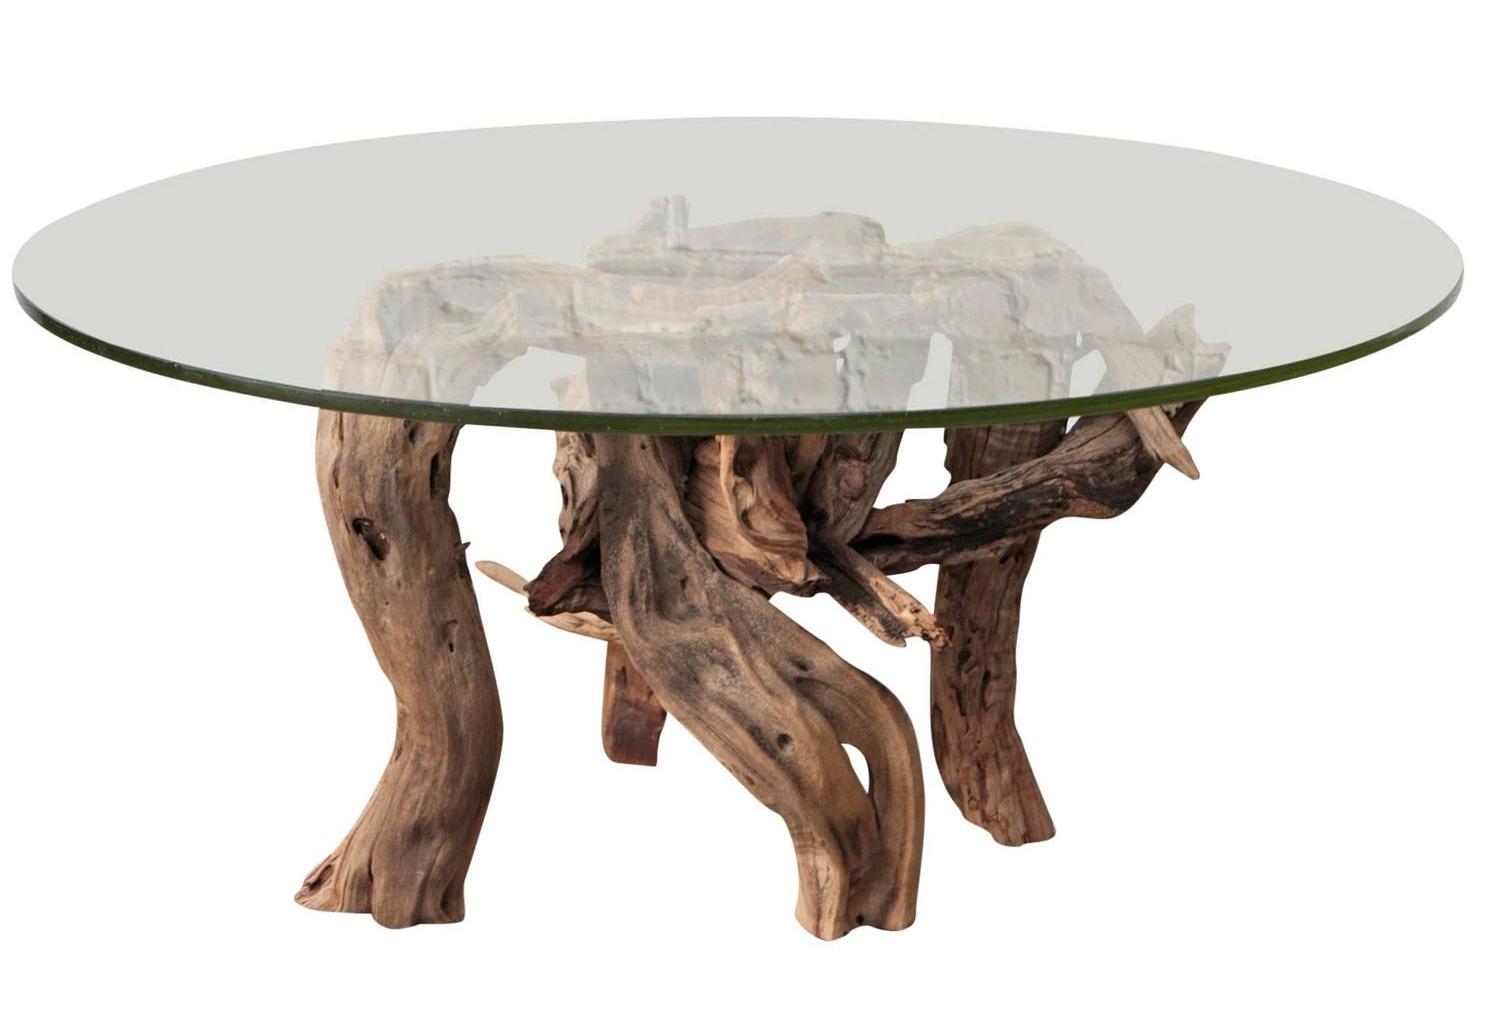 Driftwood Coffee Tables For Sale | Roy Home Design